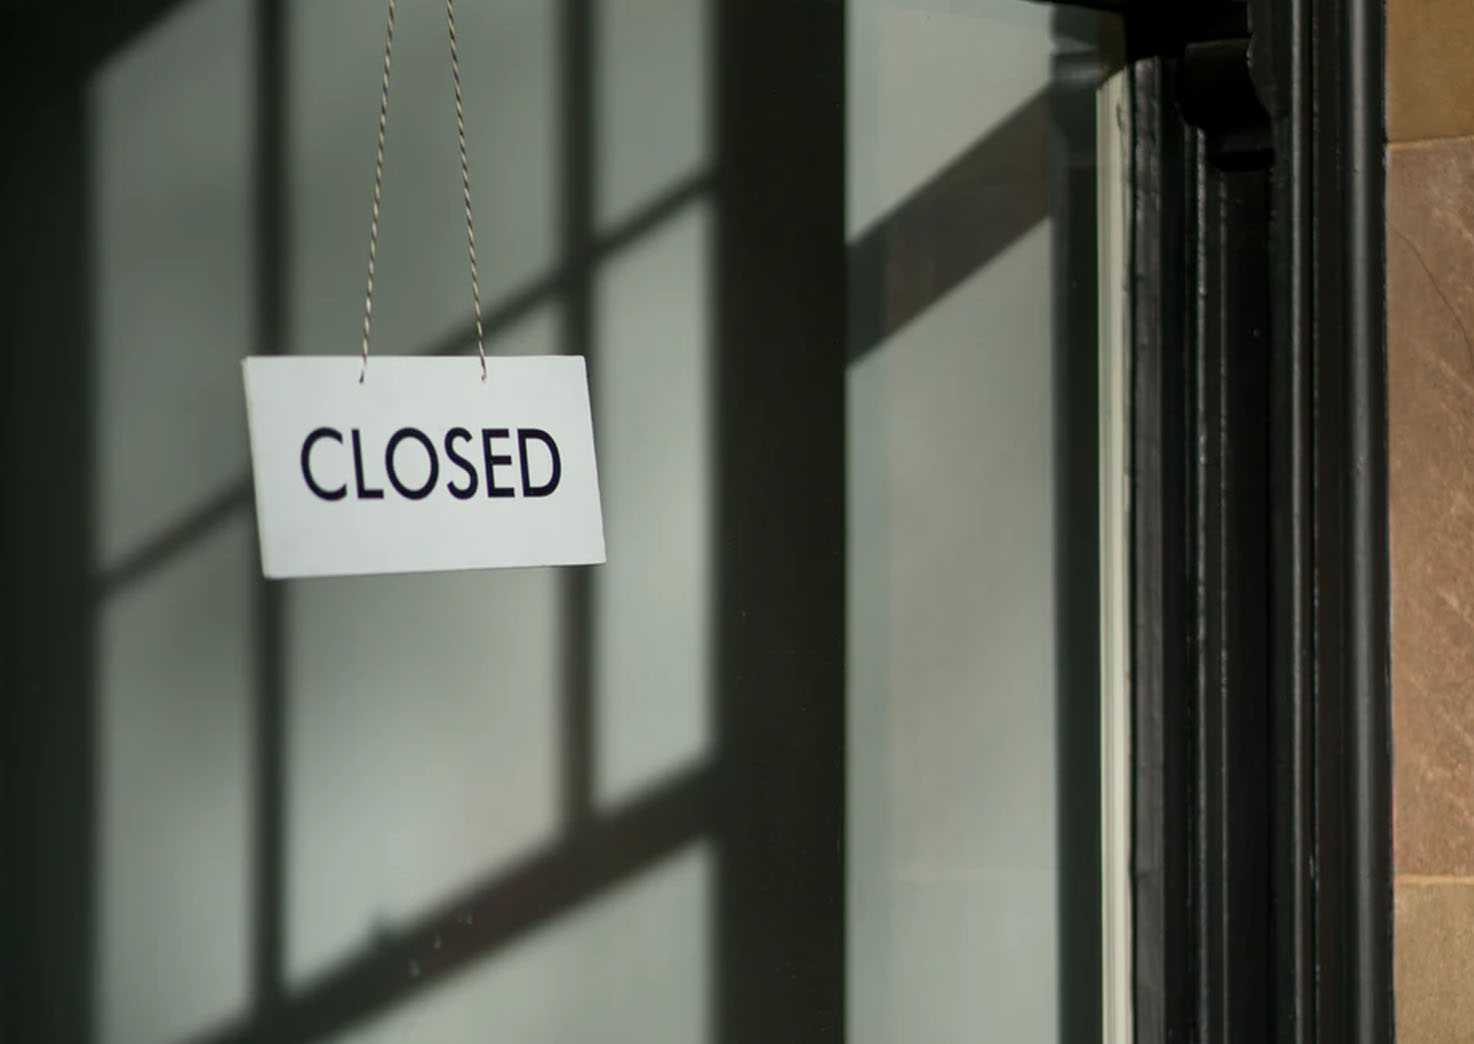 Image of a "closed" sign hanging in the door